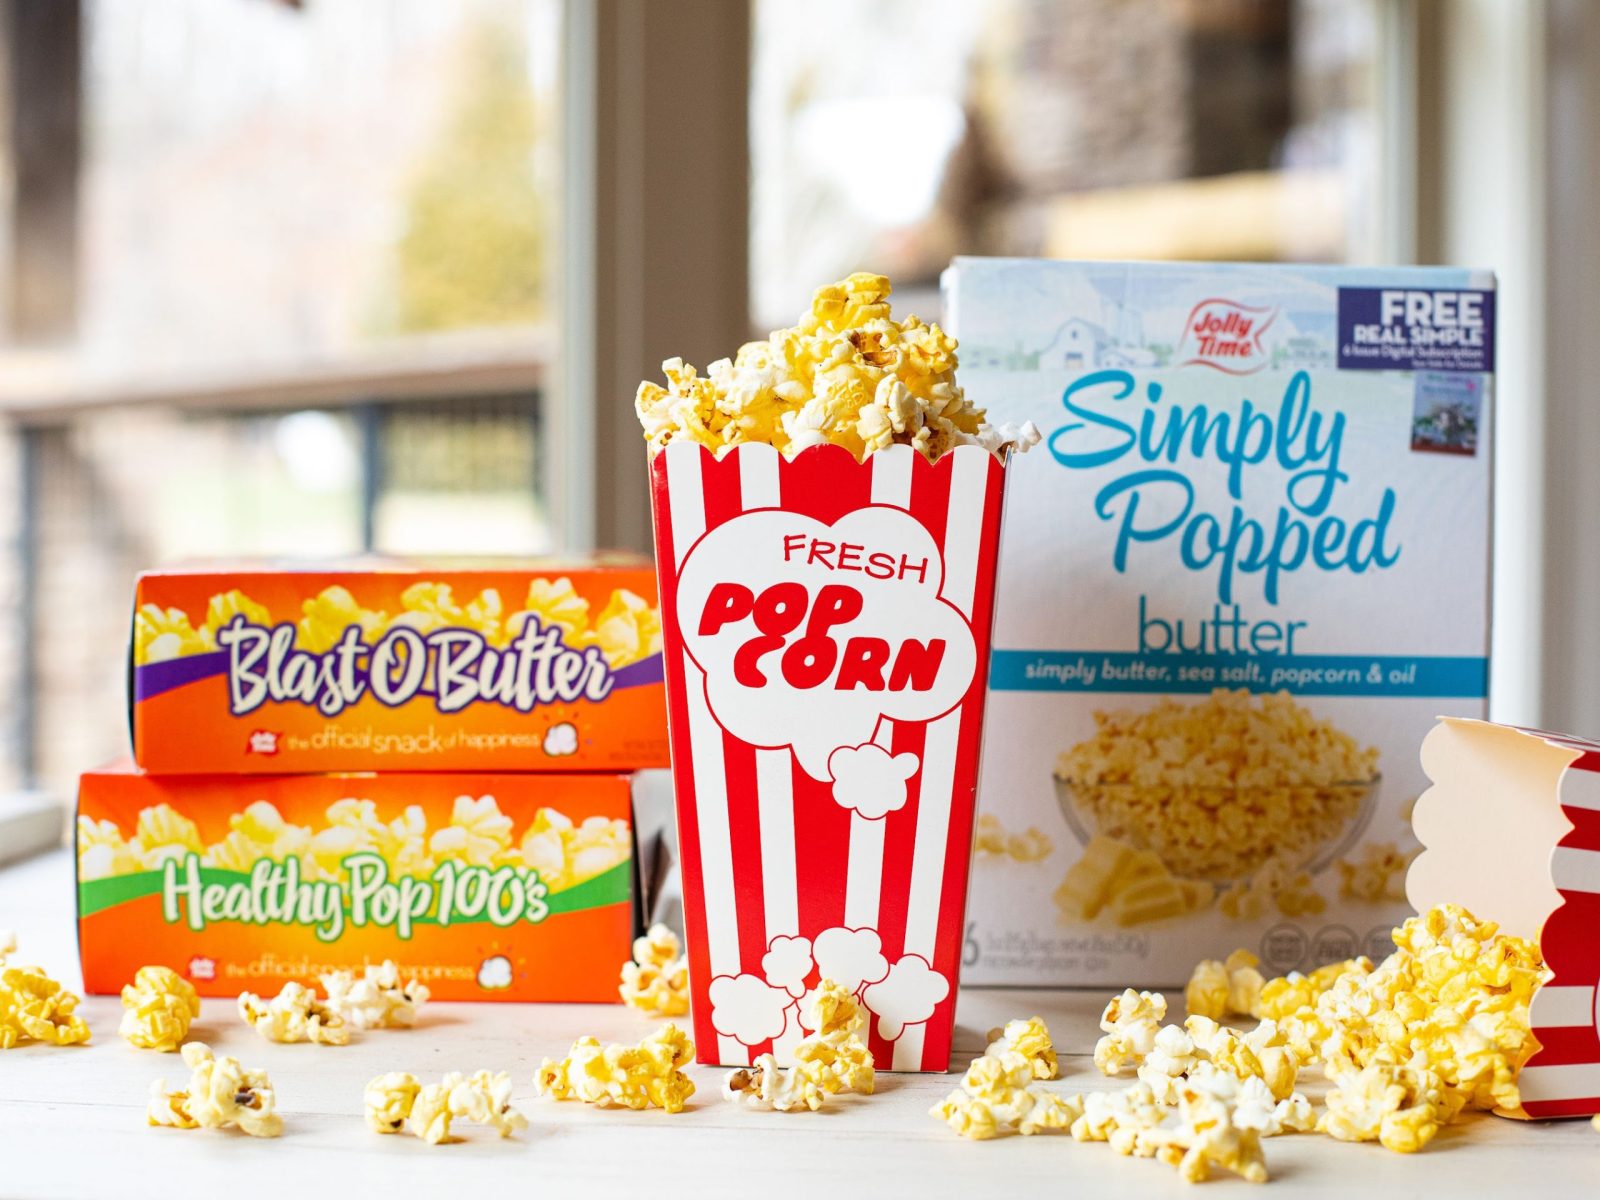 Be Sure To Grab Jolly Time Pop Corn At Publix AND Don’t Forget To Enter To Win A $50 Publix Gift Card